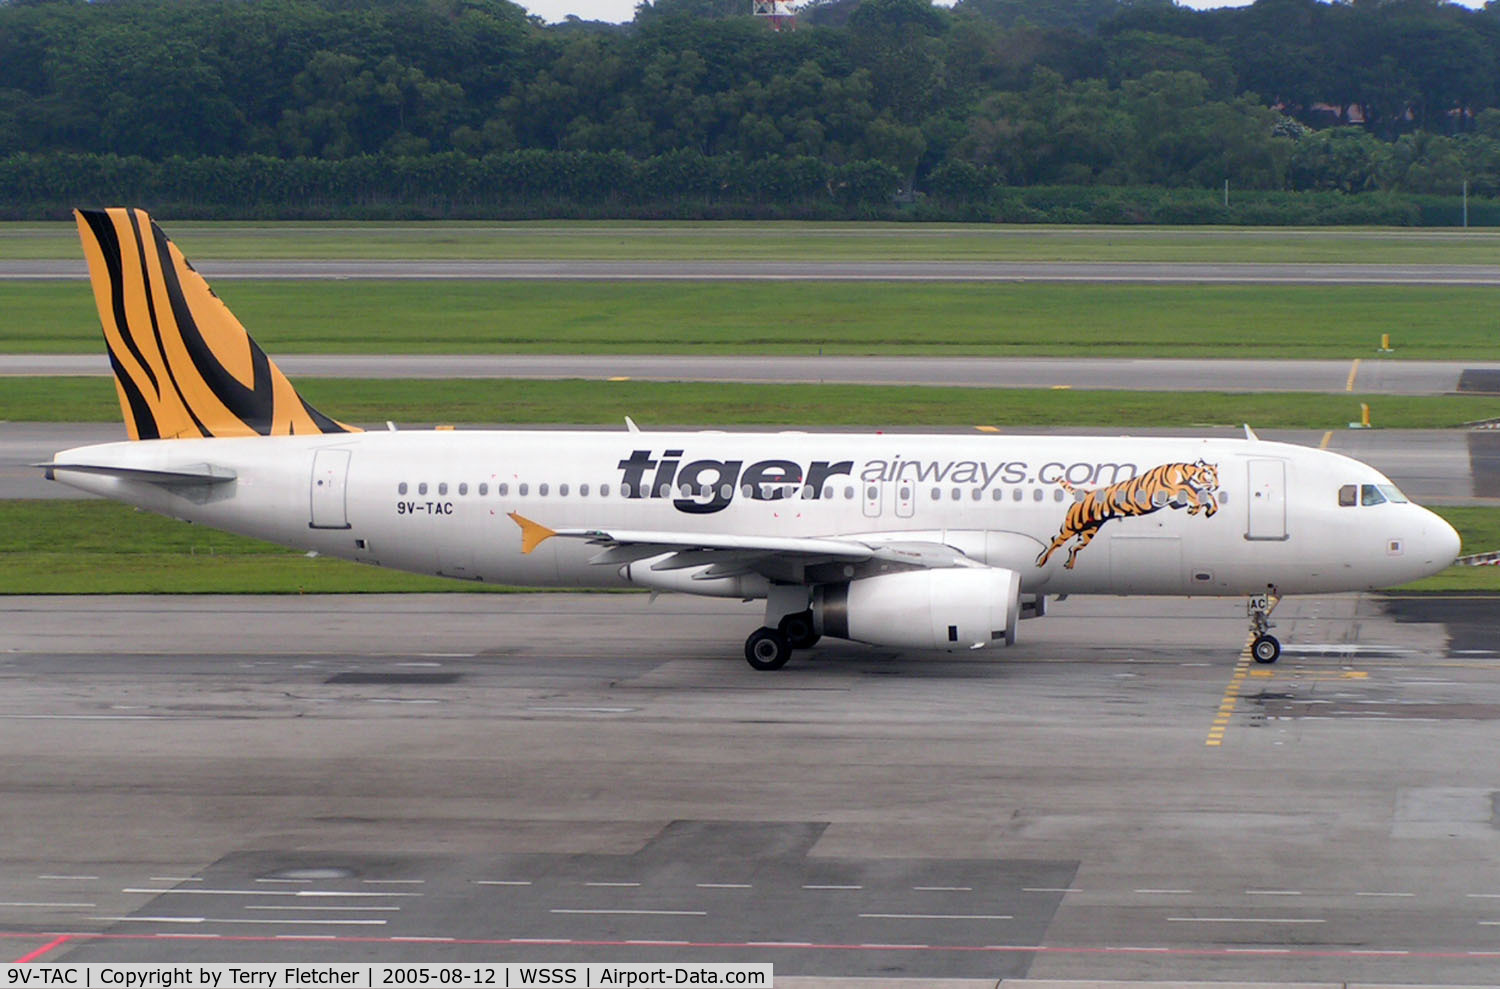 9V-TAC, 2004 Airbus A320-232 C/N 2331, Tiger Airways A320 taxies in at Singapore Changi